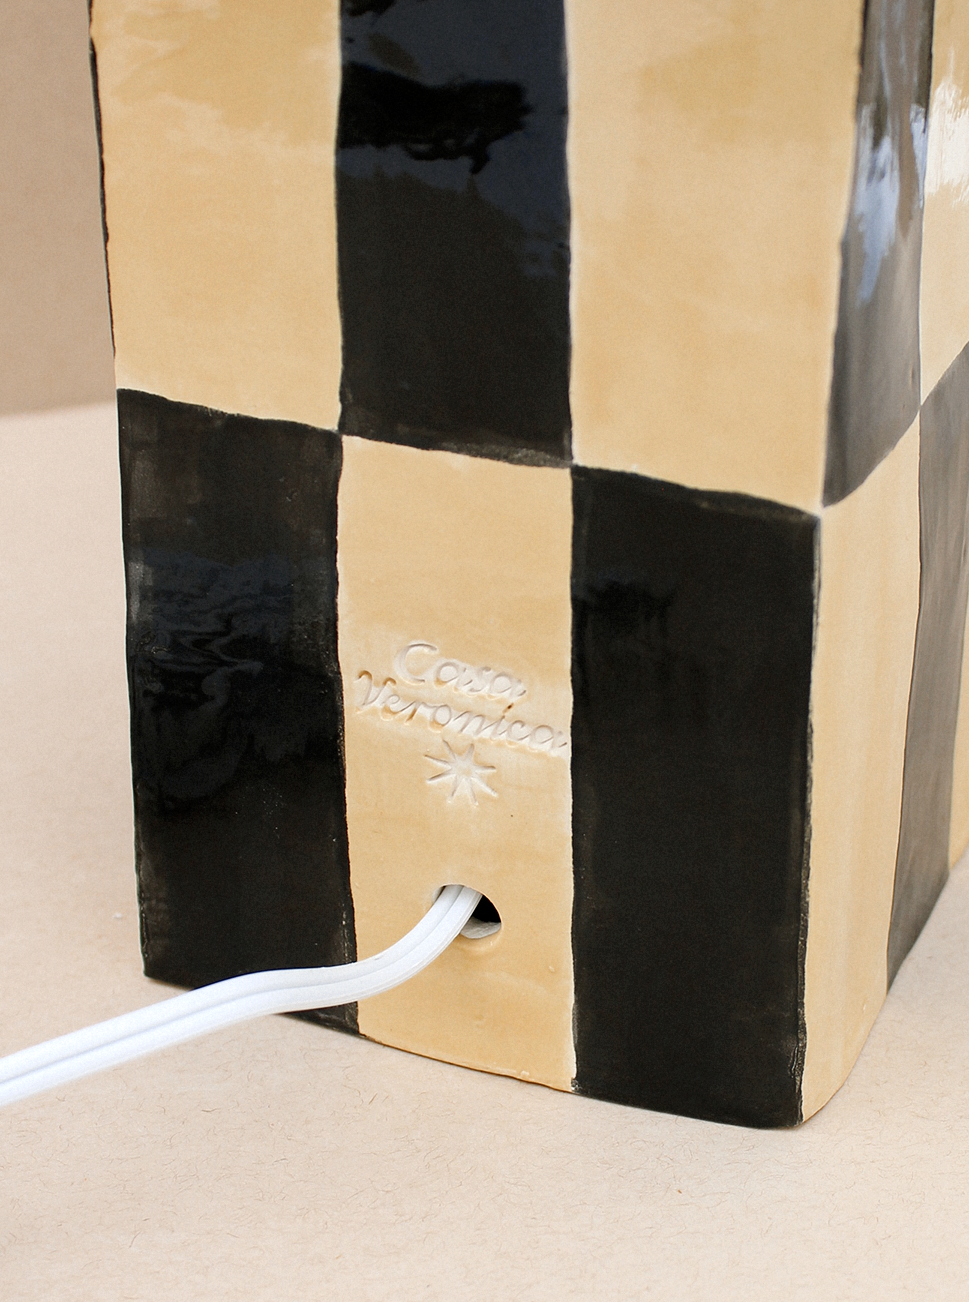 A striped black and beige ceramic Socorro Lamp base with the brand "Casa Veronica" embossed on it, featuring a white power cord extending from a brass socket at the bottom.